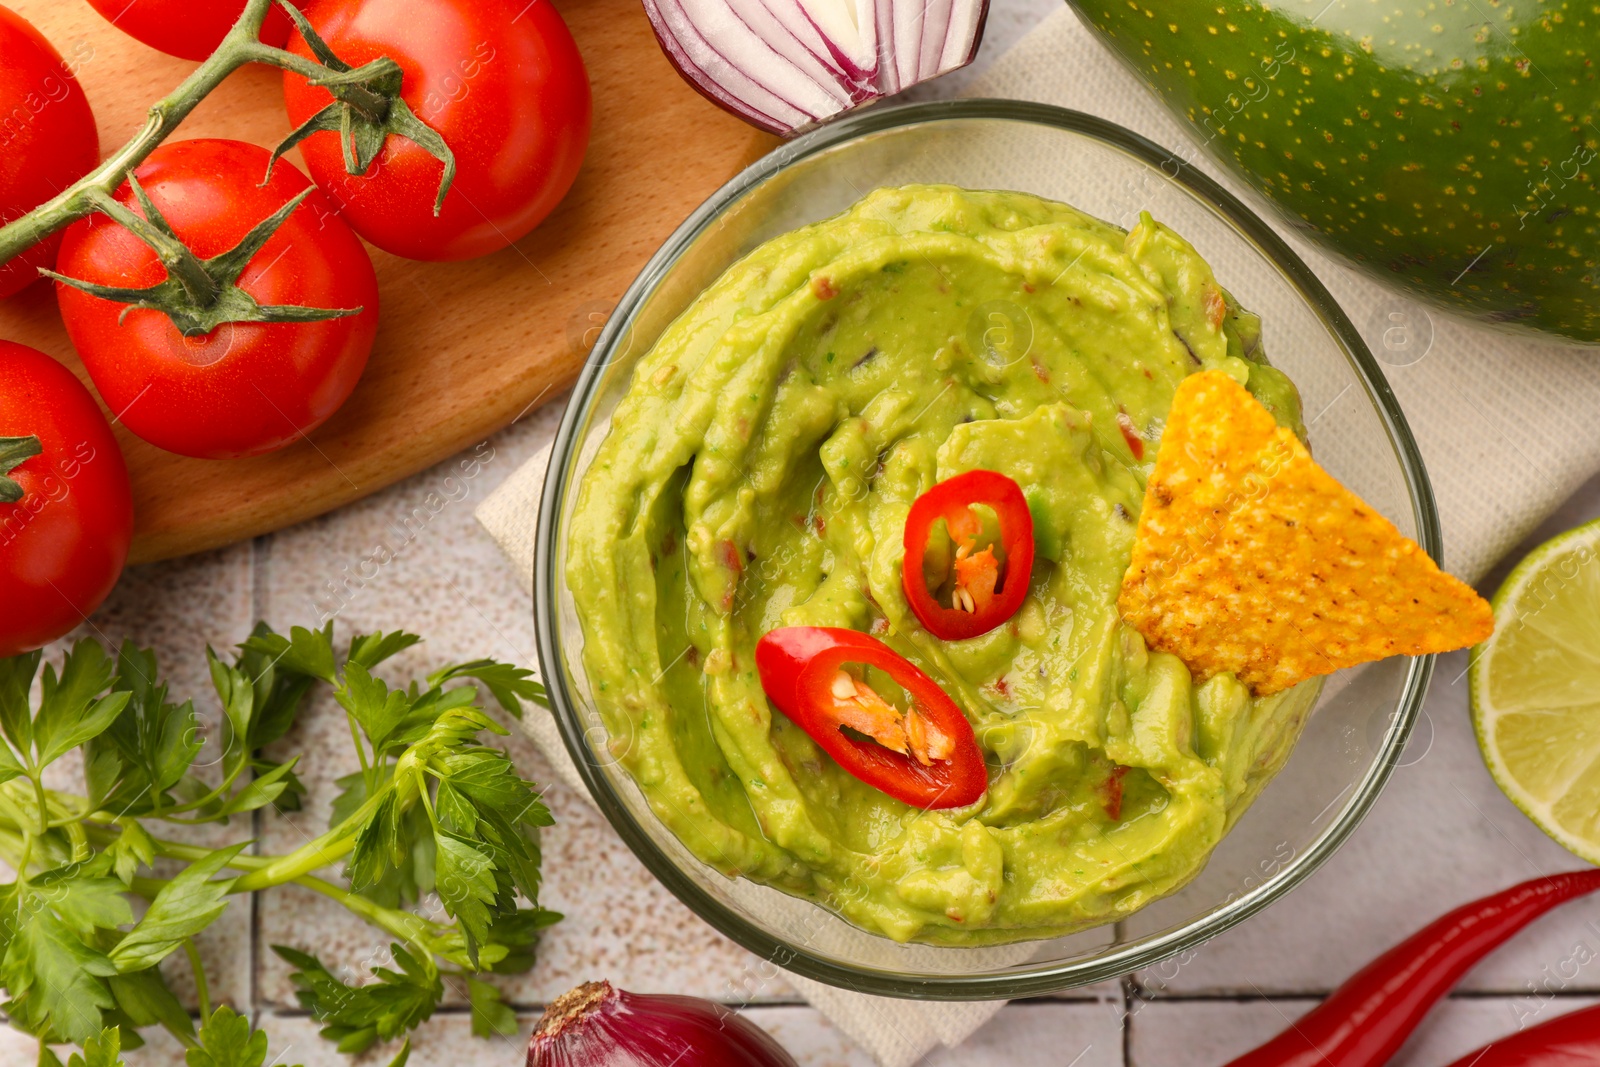 Photo of Bowl of delicious guacamole, nachos chip and ingredients on white tiled table, flat lay